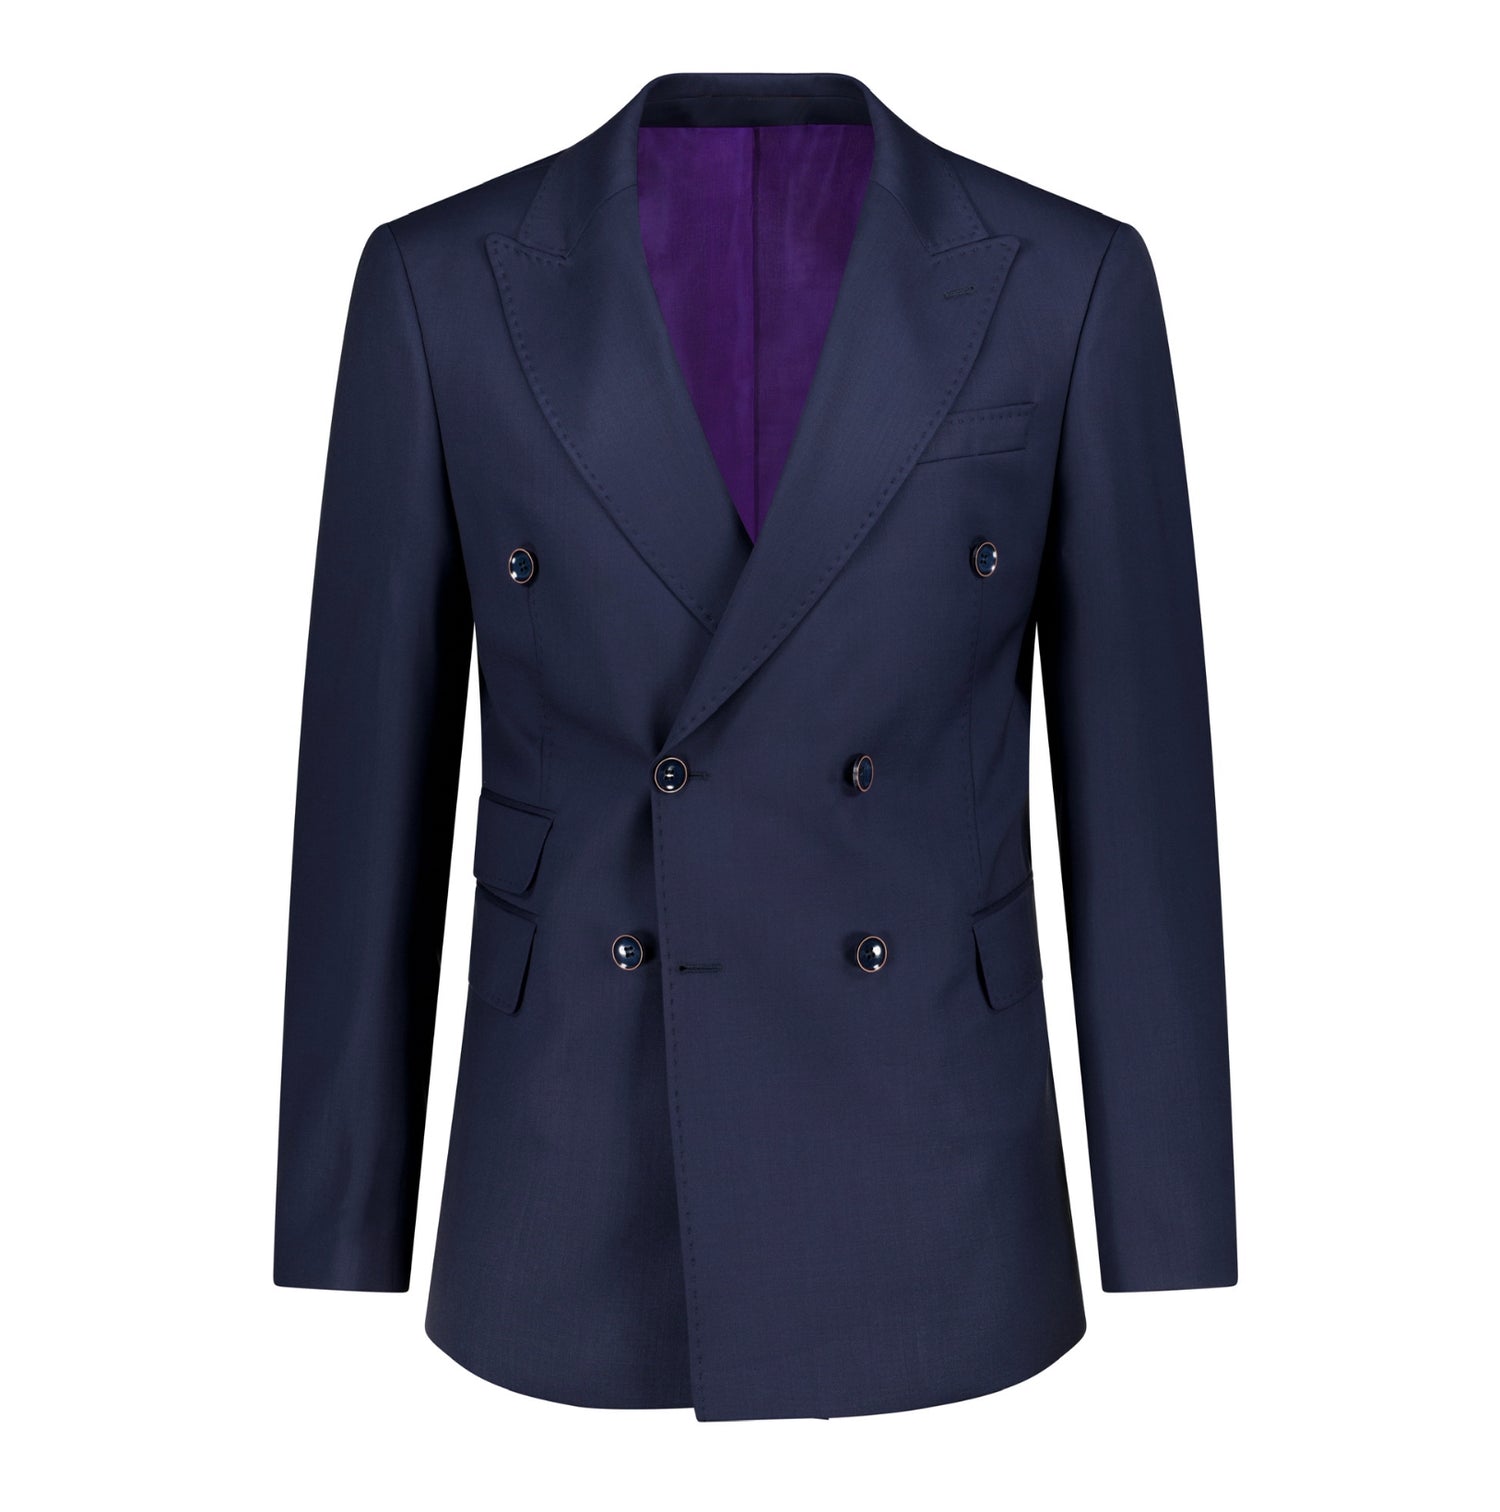 The Zannet Double Breasted Wool Jacket